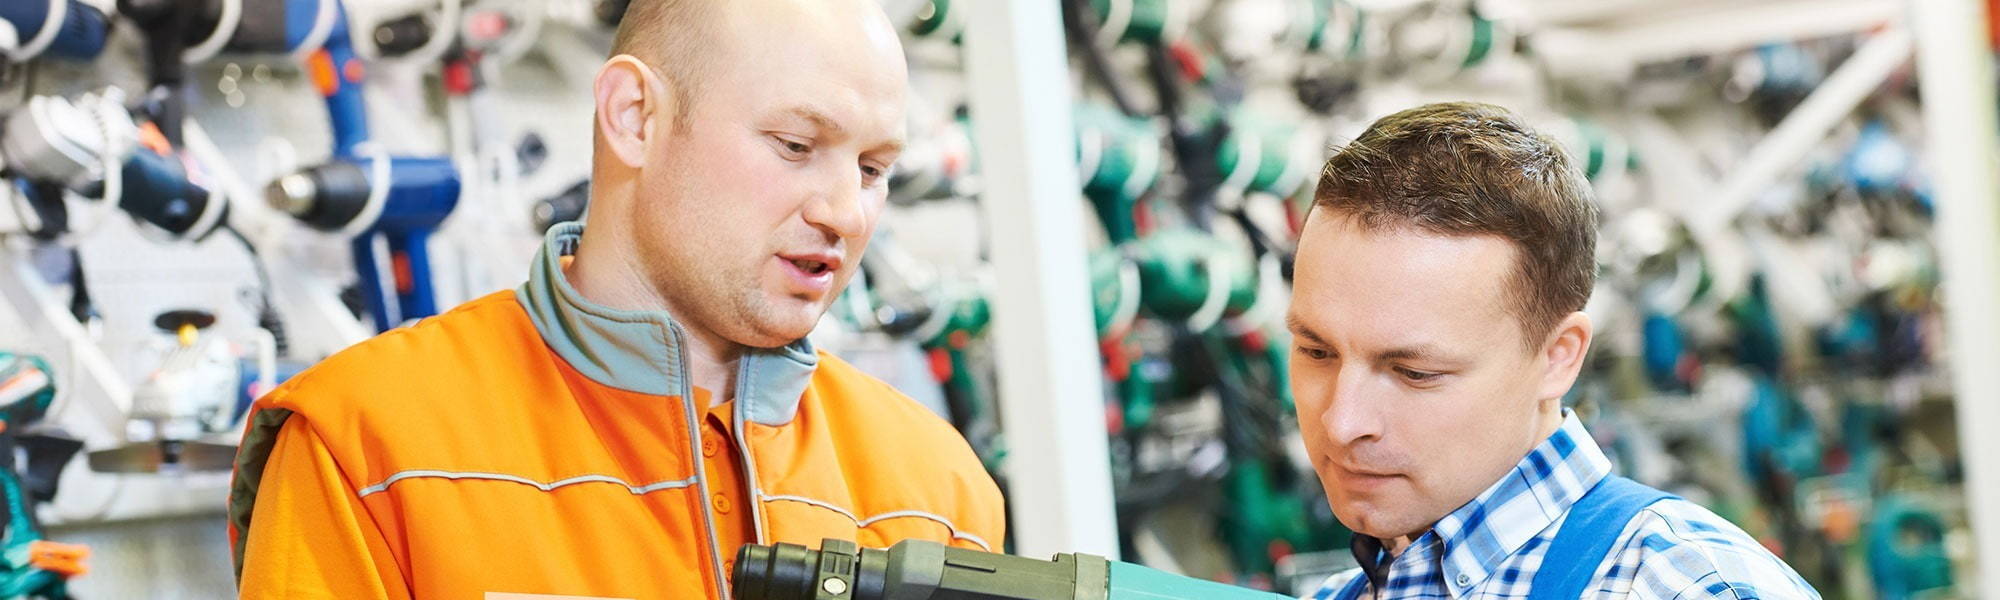 two men at plant and tool hire depot looking at power tools in branch